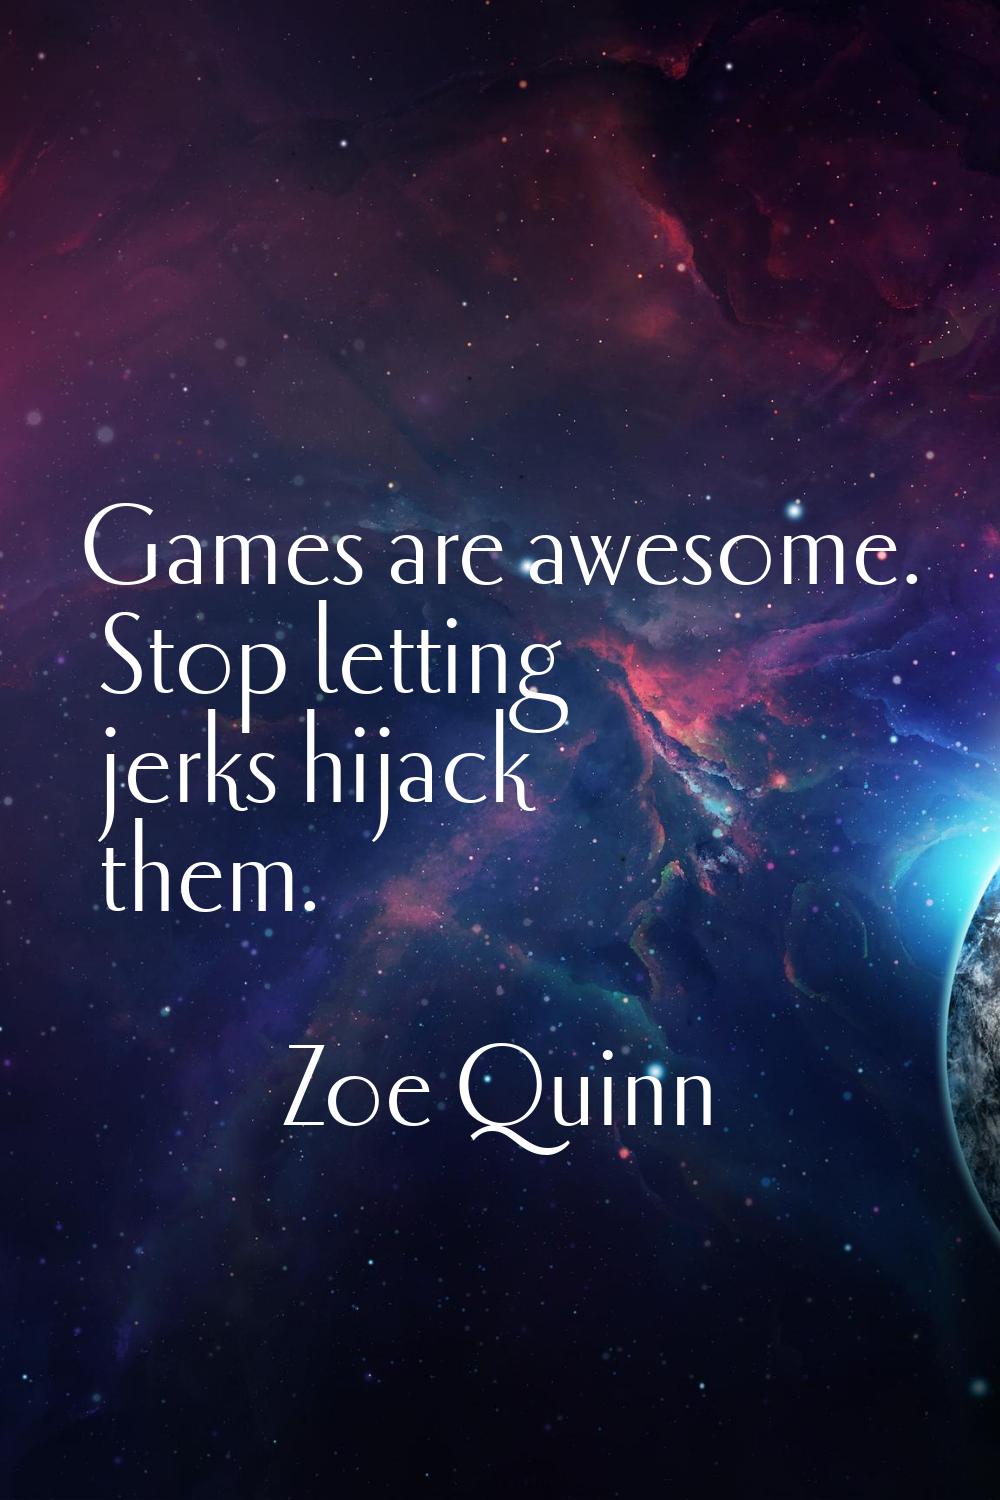 Games are awesome. Stop letting jerks hijack them.